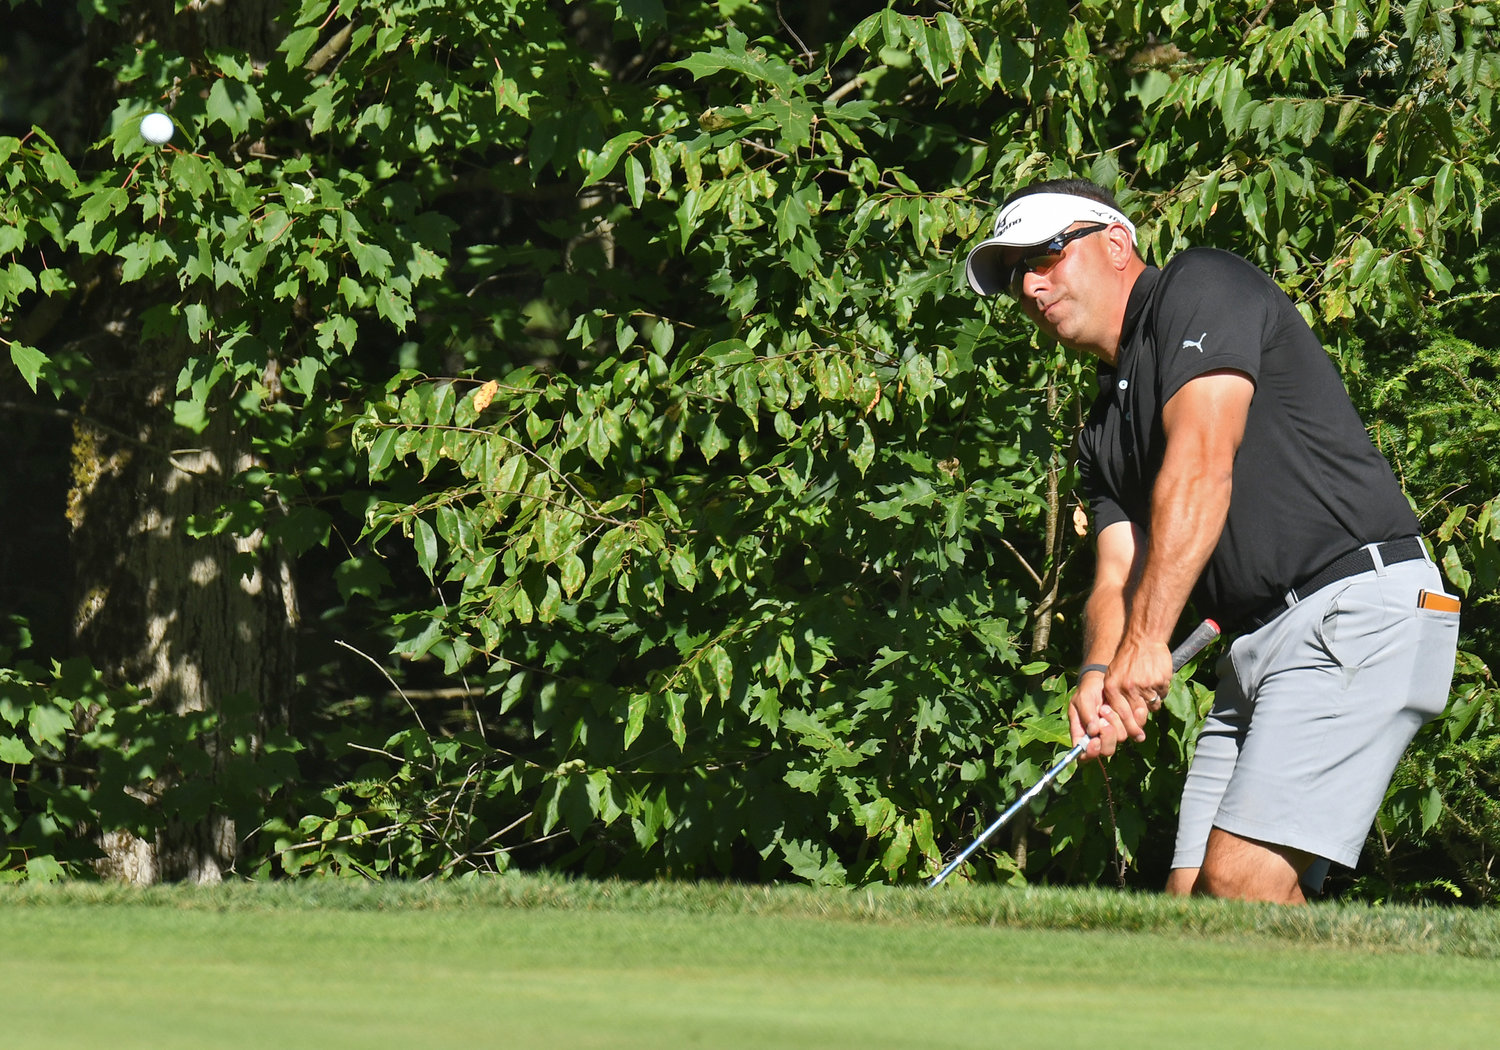 Aaron Fiorini chips to the par 3 17th hole on Sunday afternoon at McConnellsville Country Club during the second round of the Rome City Men's Amateur Golf Championship.